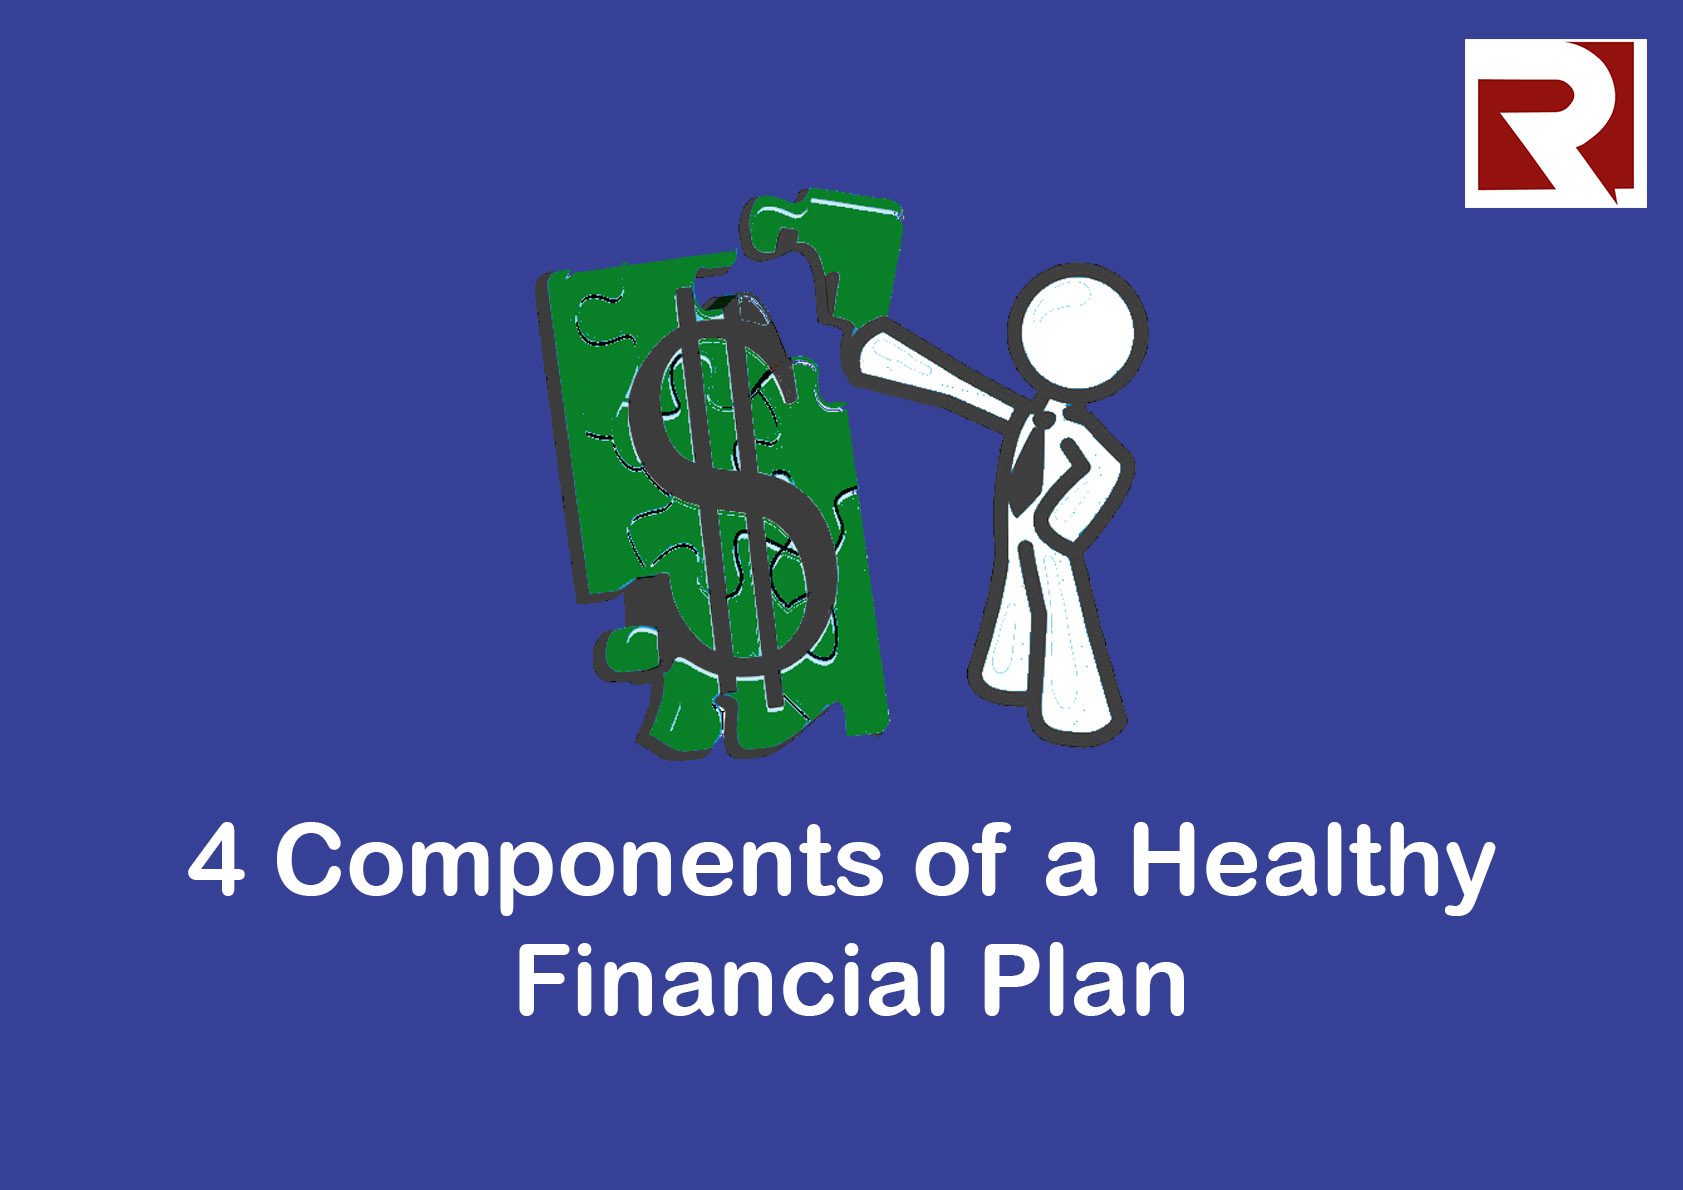 Four Components of a Healthy Financial Plan